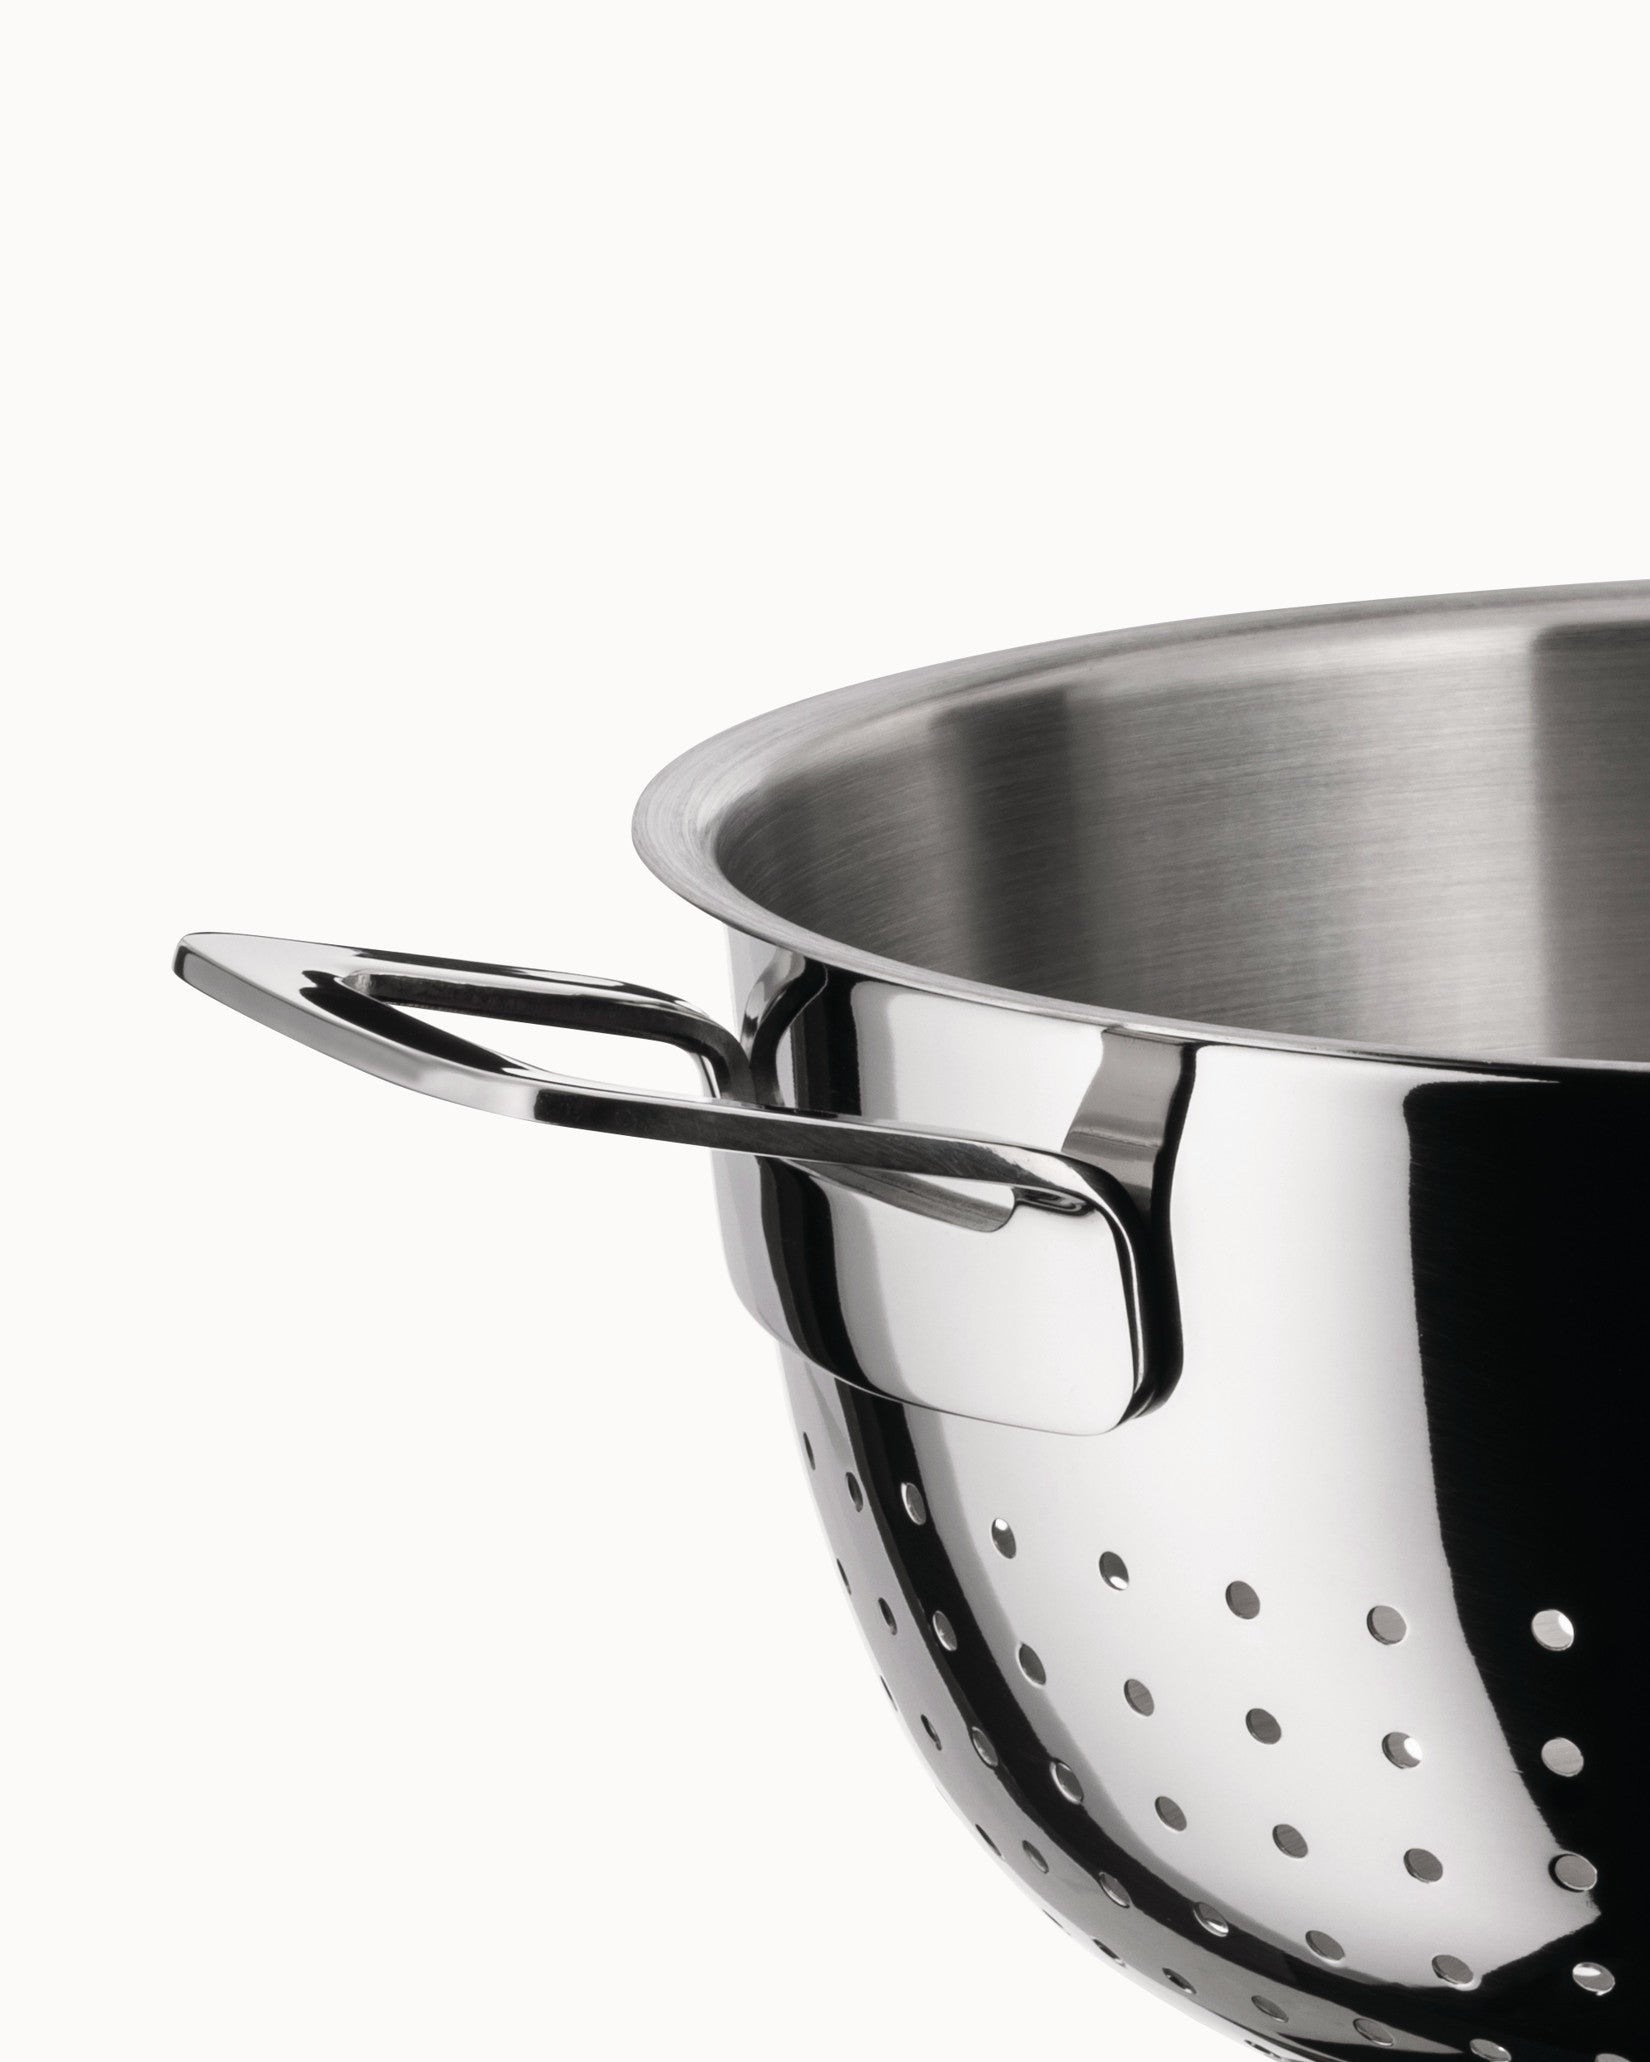 Alessi set of 7 pots and pans - Black